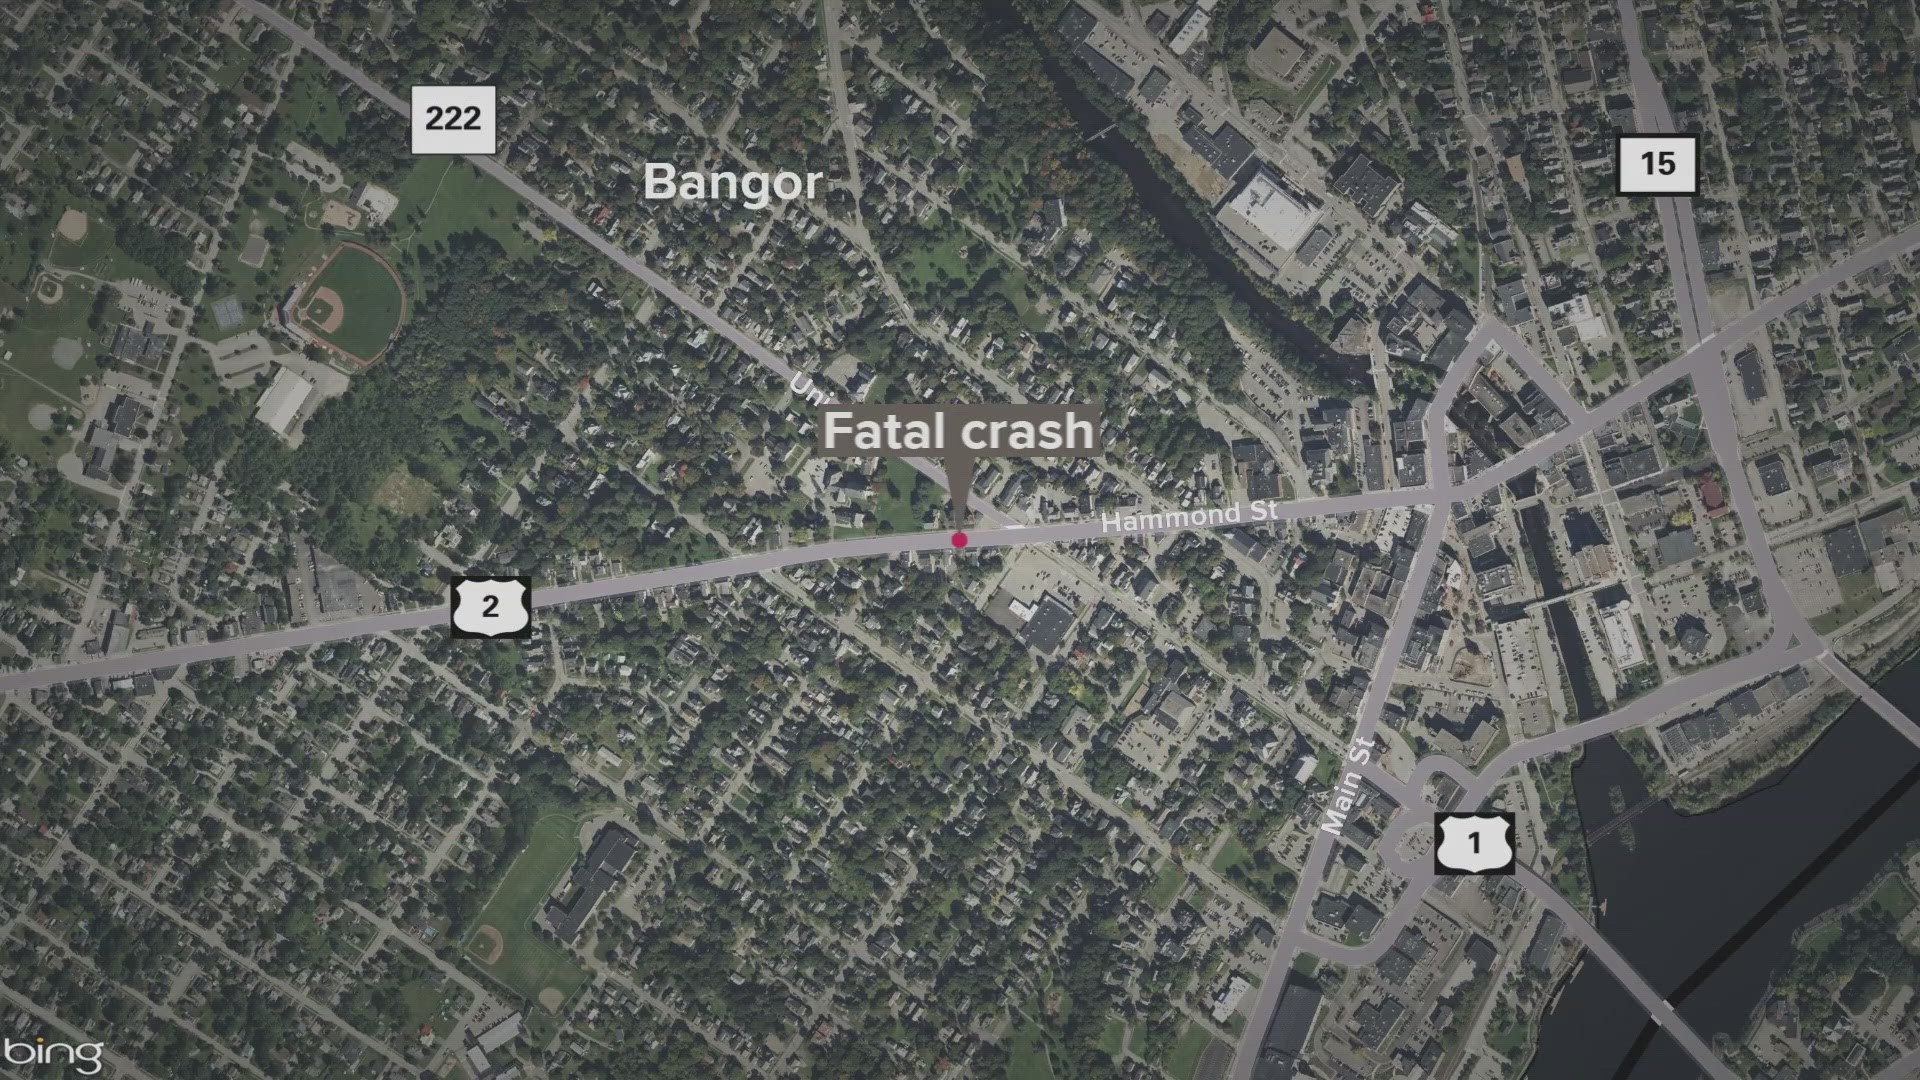 A 36-year-old from Carmel has died following a rollover crash on Outer Hammond Street in Bangor.